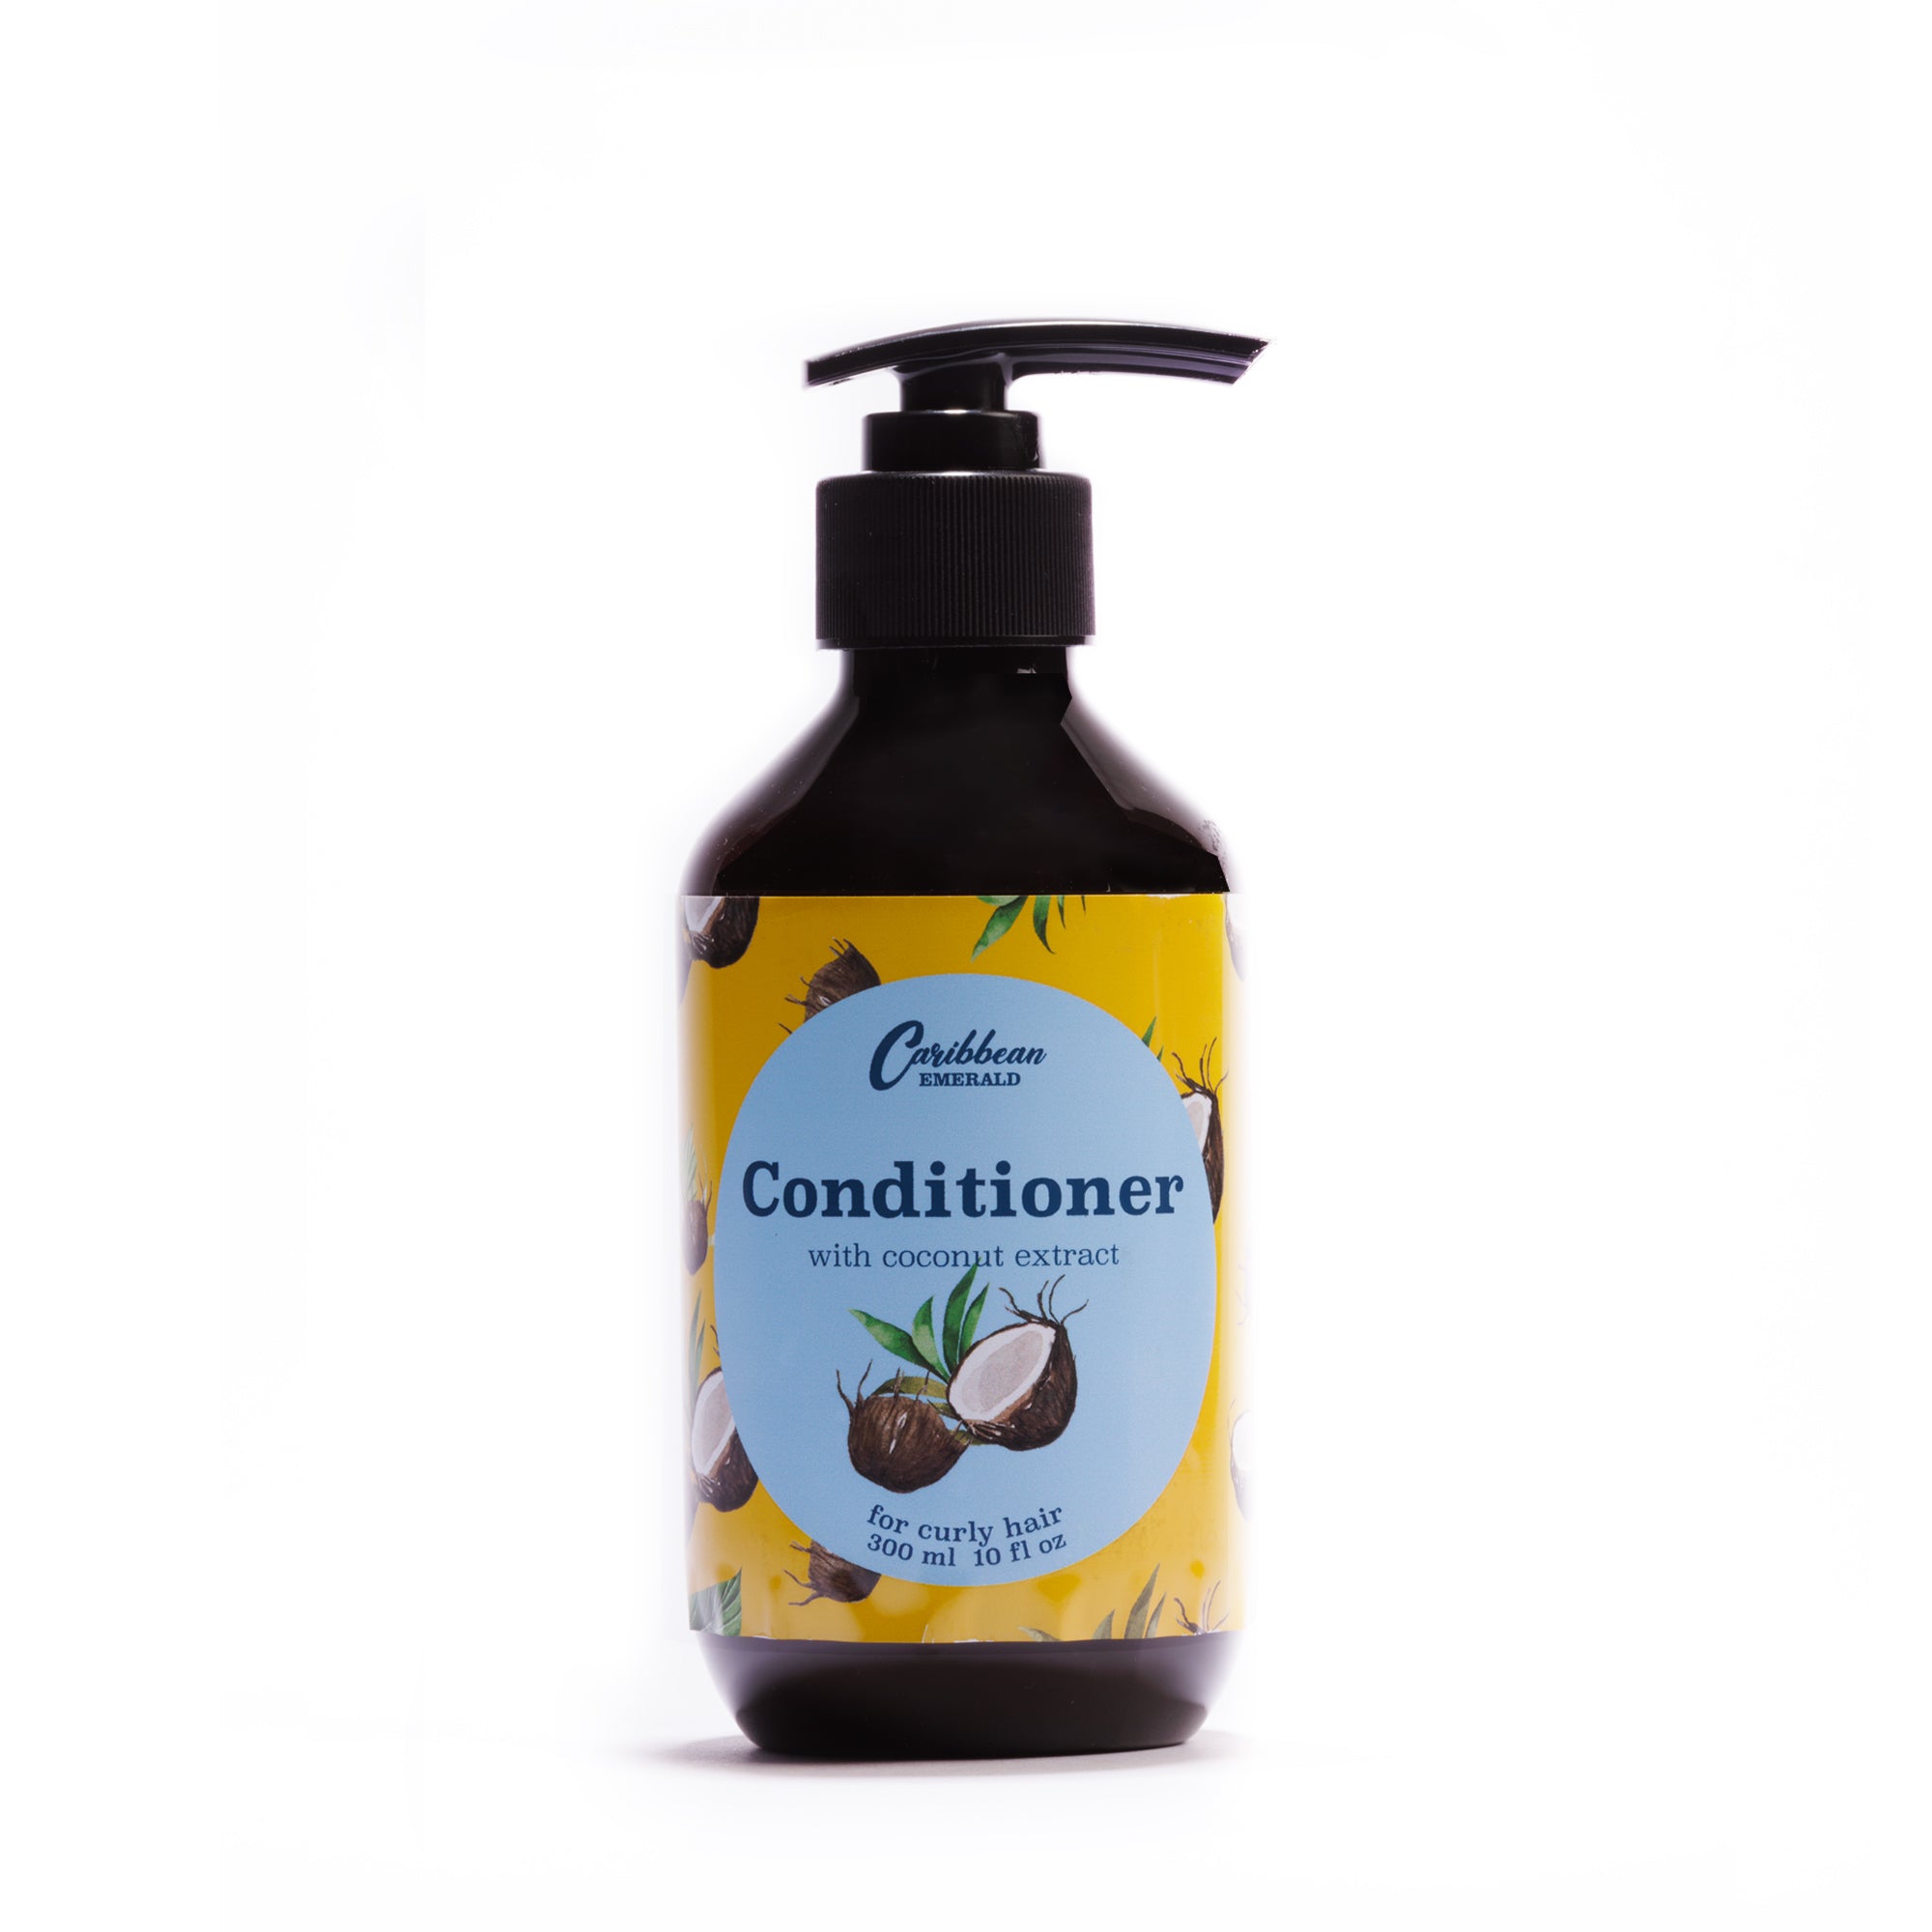 Conditioner with coconut extract